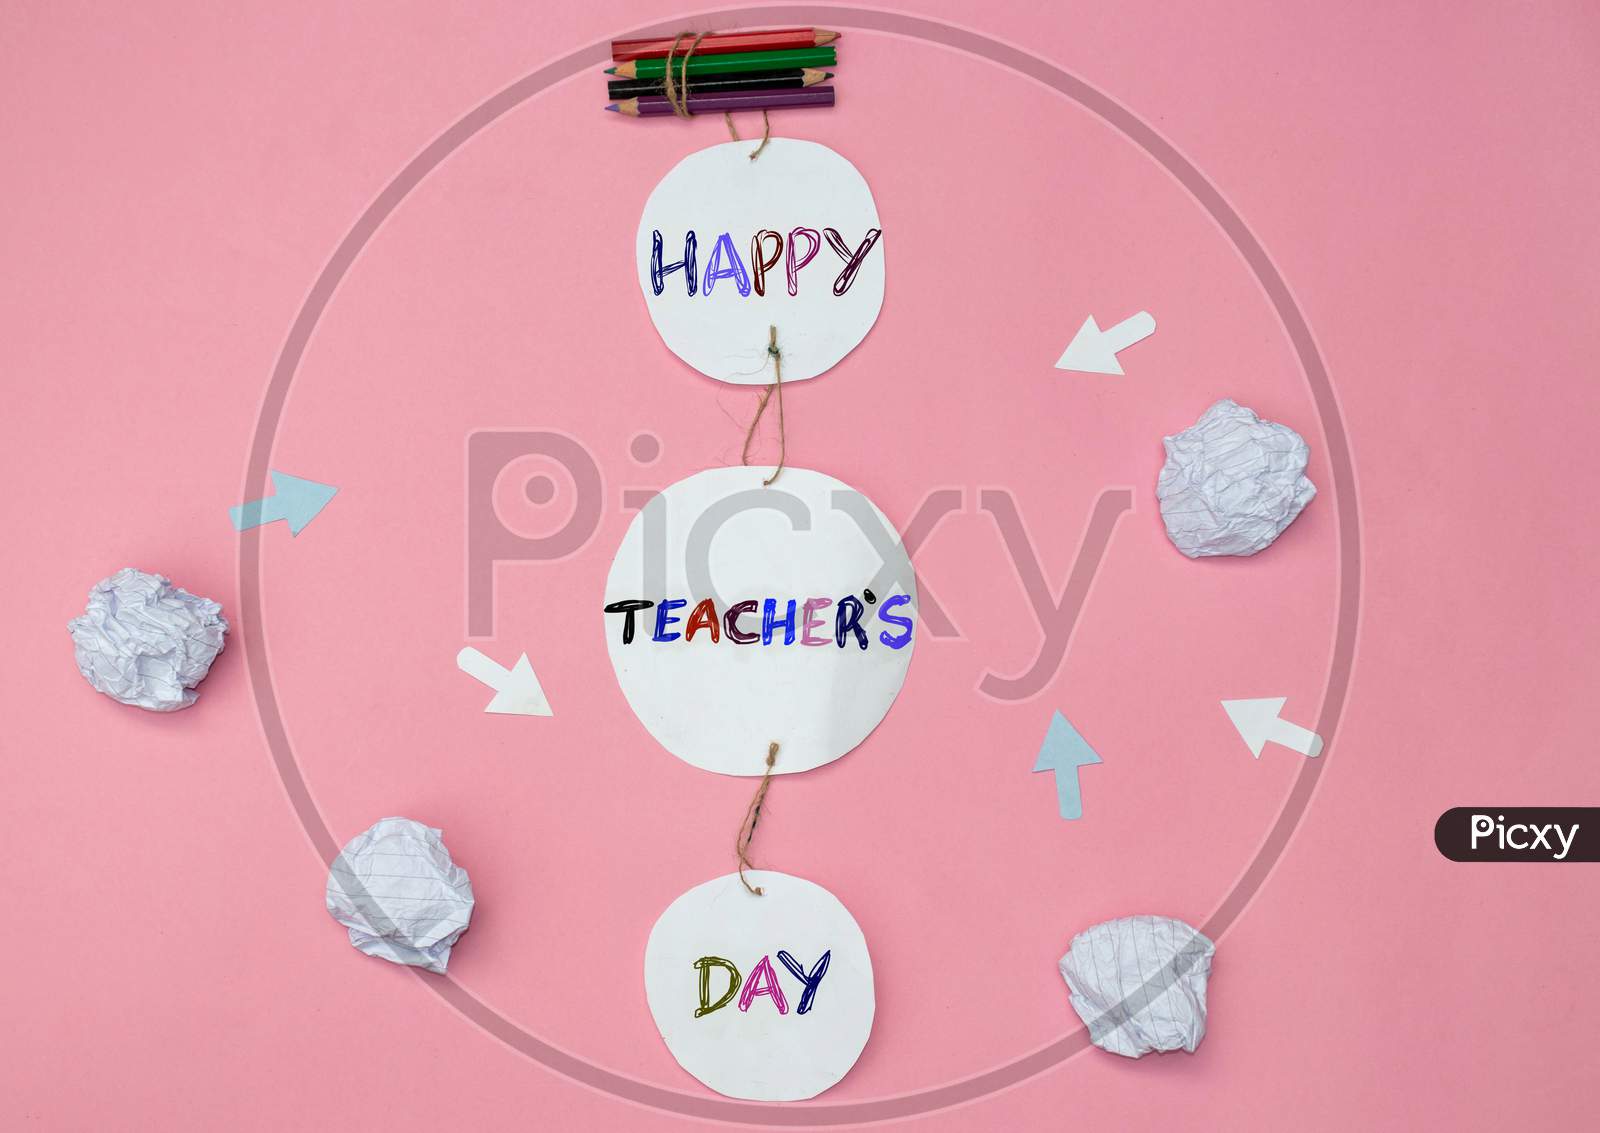 Happy Teacher's Day Creative Photo With Color Pencils And Crumpled Paper Balls On Pink Background, Perfect For Wallpaper